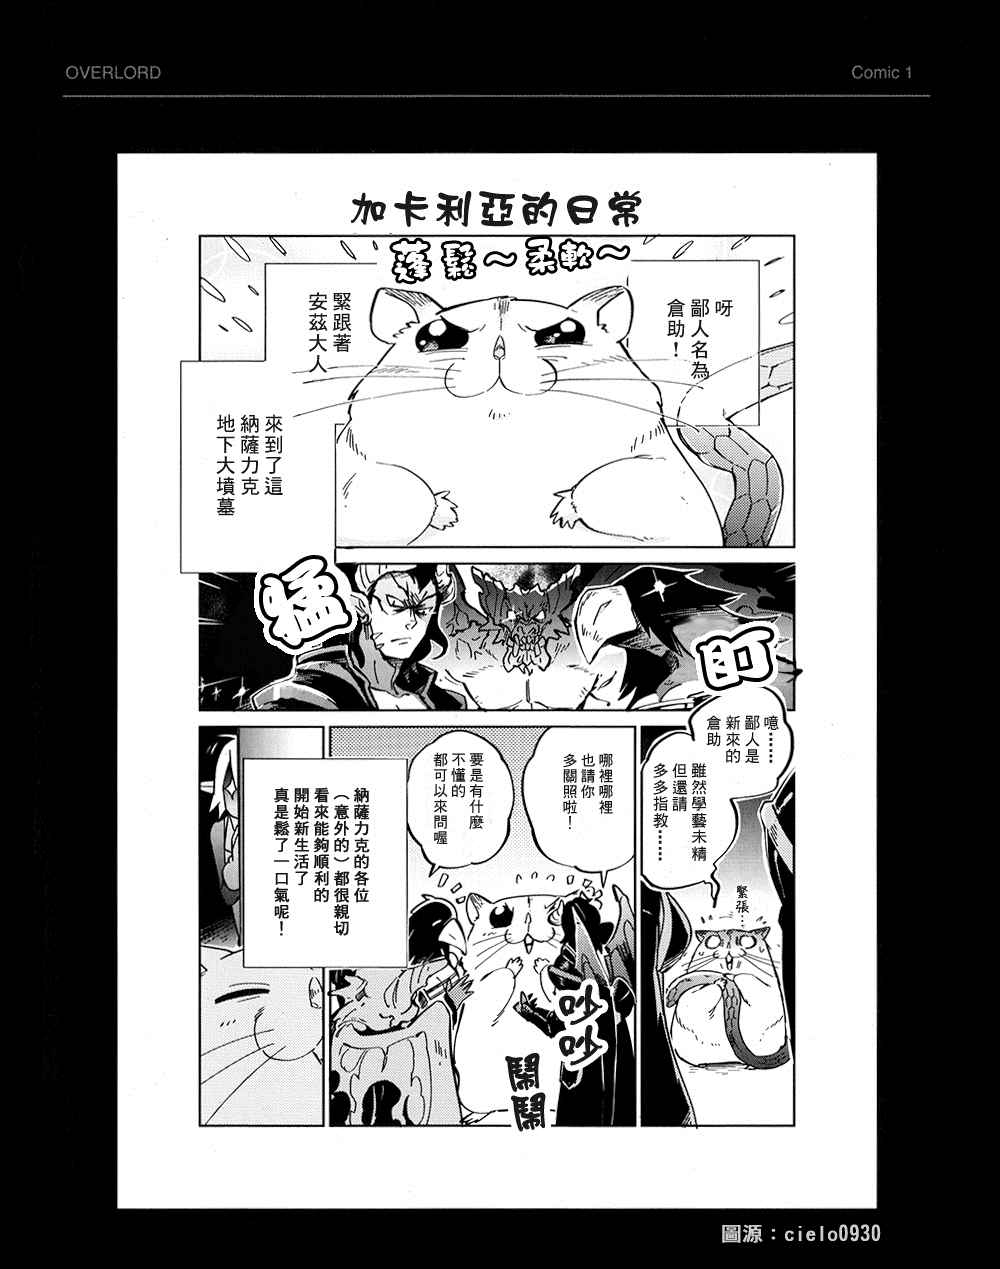 《OVERLORD》漫画 BD附录04